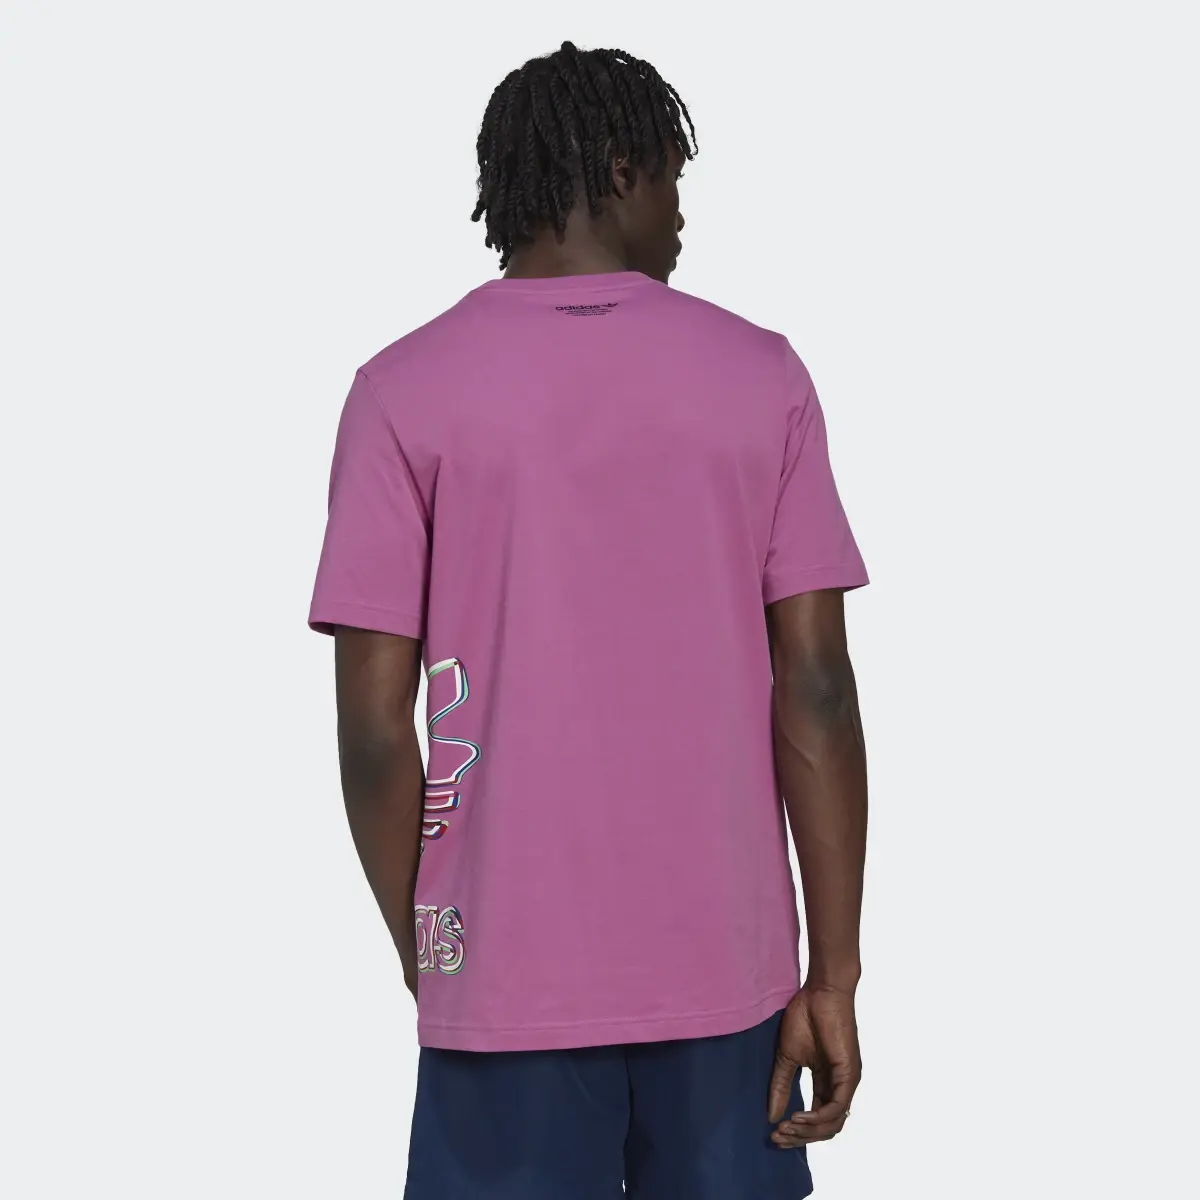 Adidas T-shirt manches courtes Hyperreal. 3